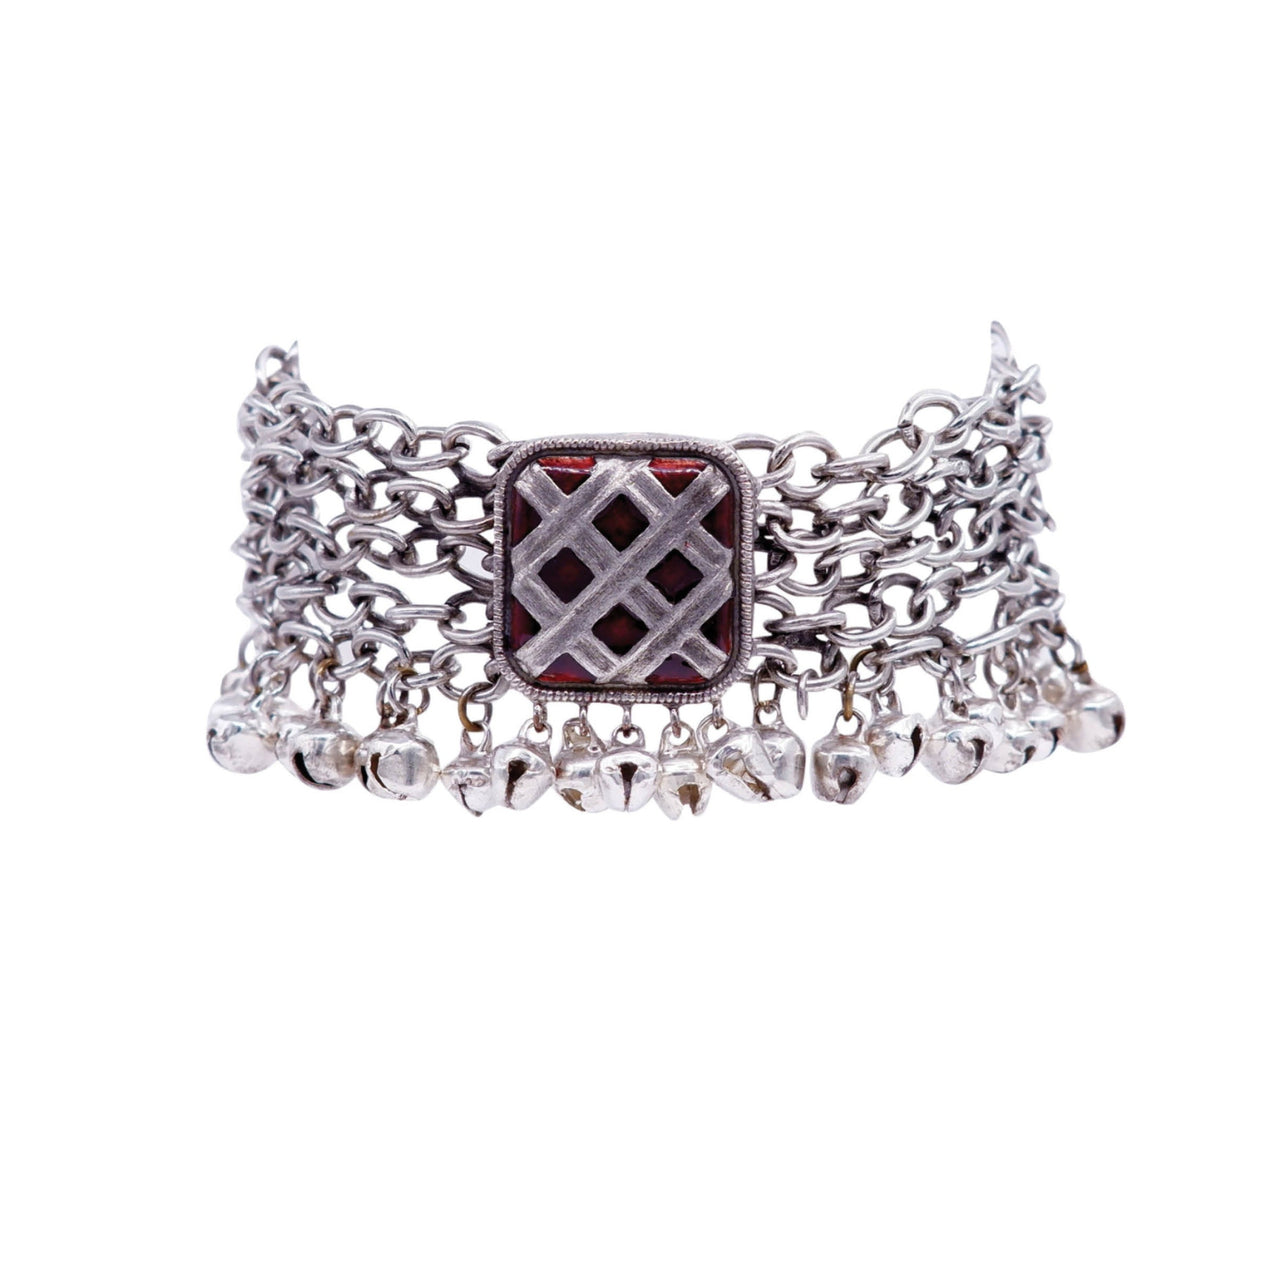 Silver plated bracelet with red stone and square piece